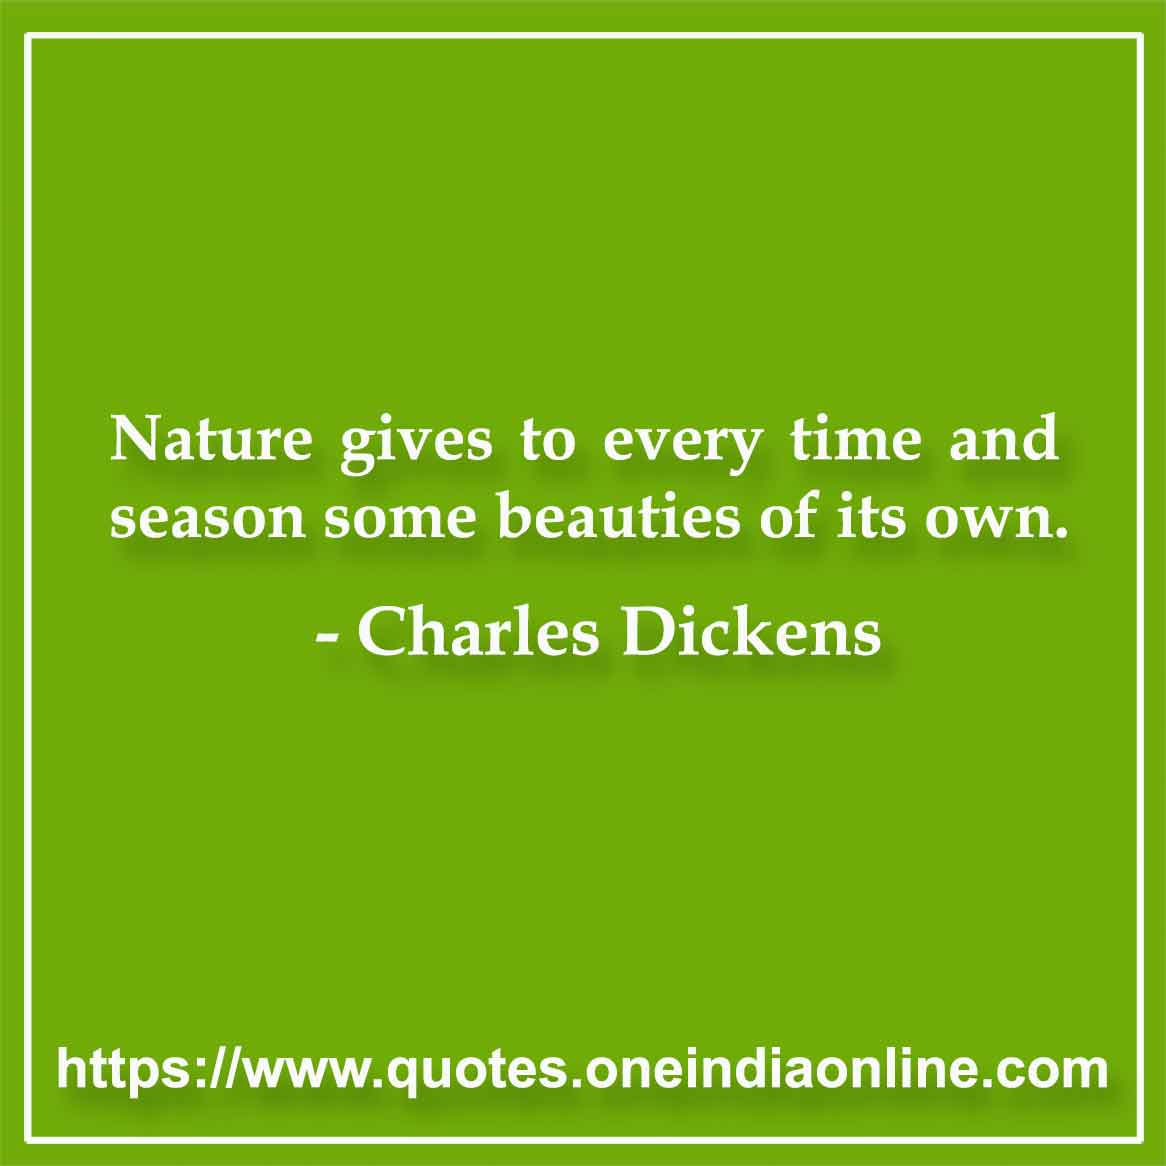 Nature gives to every time and season some beauties of its own.

- Charles Dickens